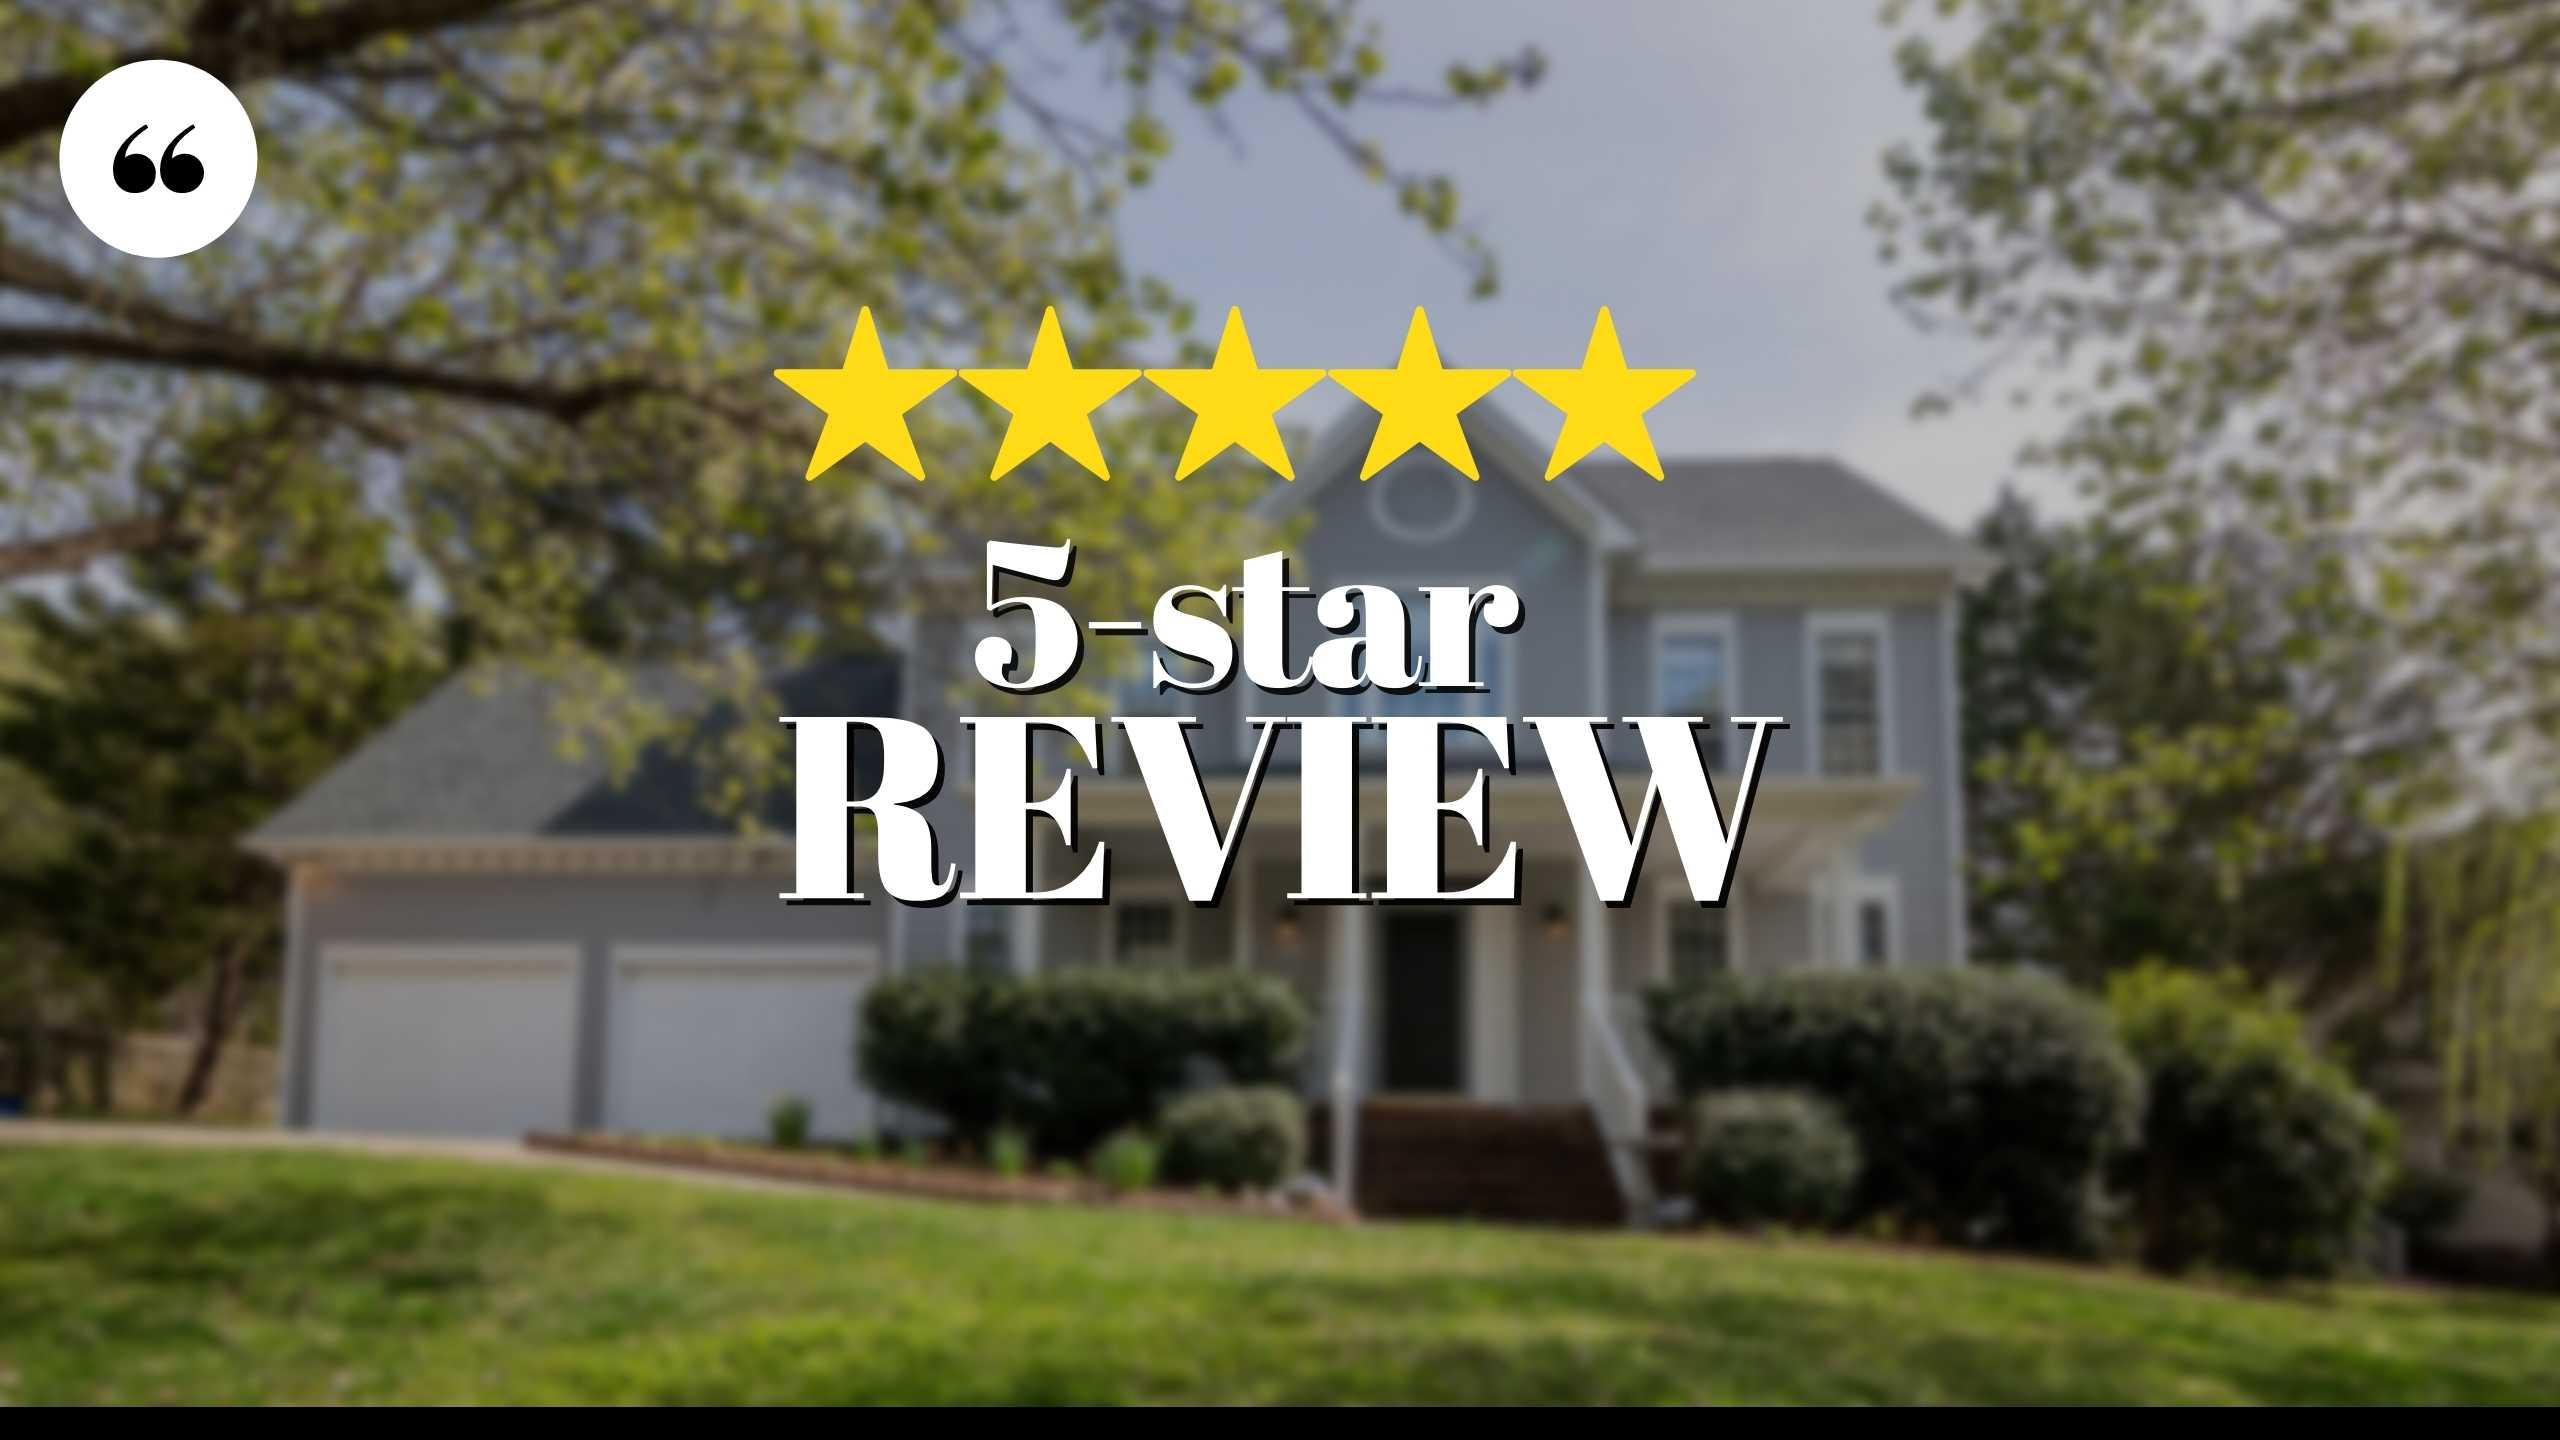 10-Star Review for The Reynolds Team!